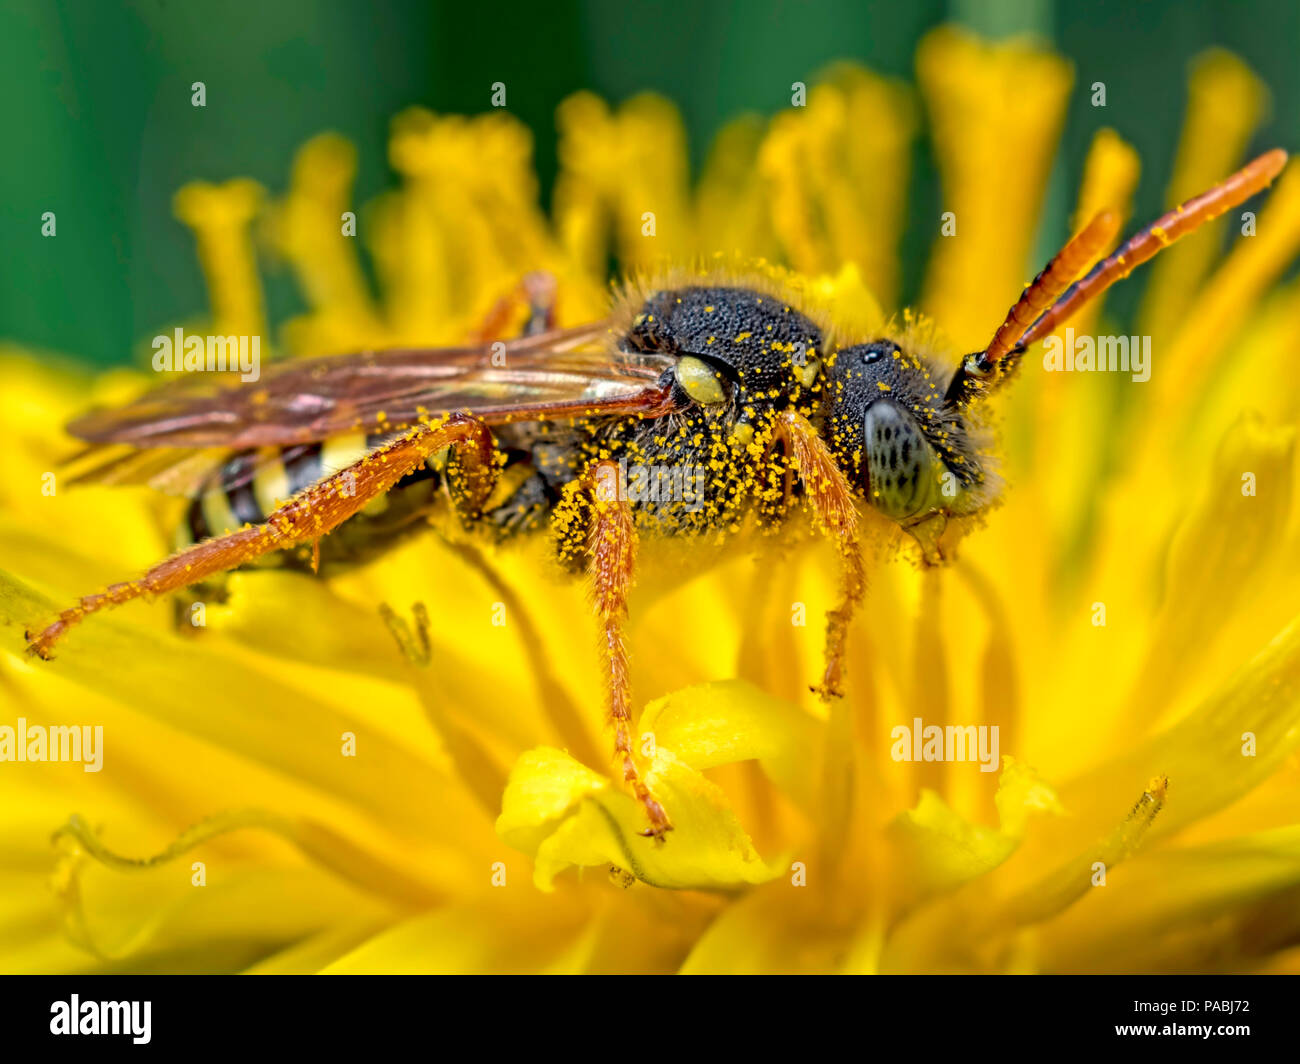 A green eyed nomada solitary bee on a dandelion flower Stock Photo